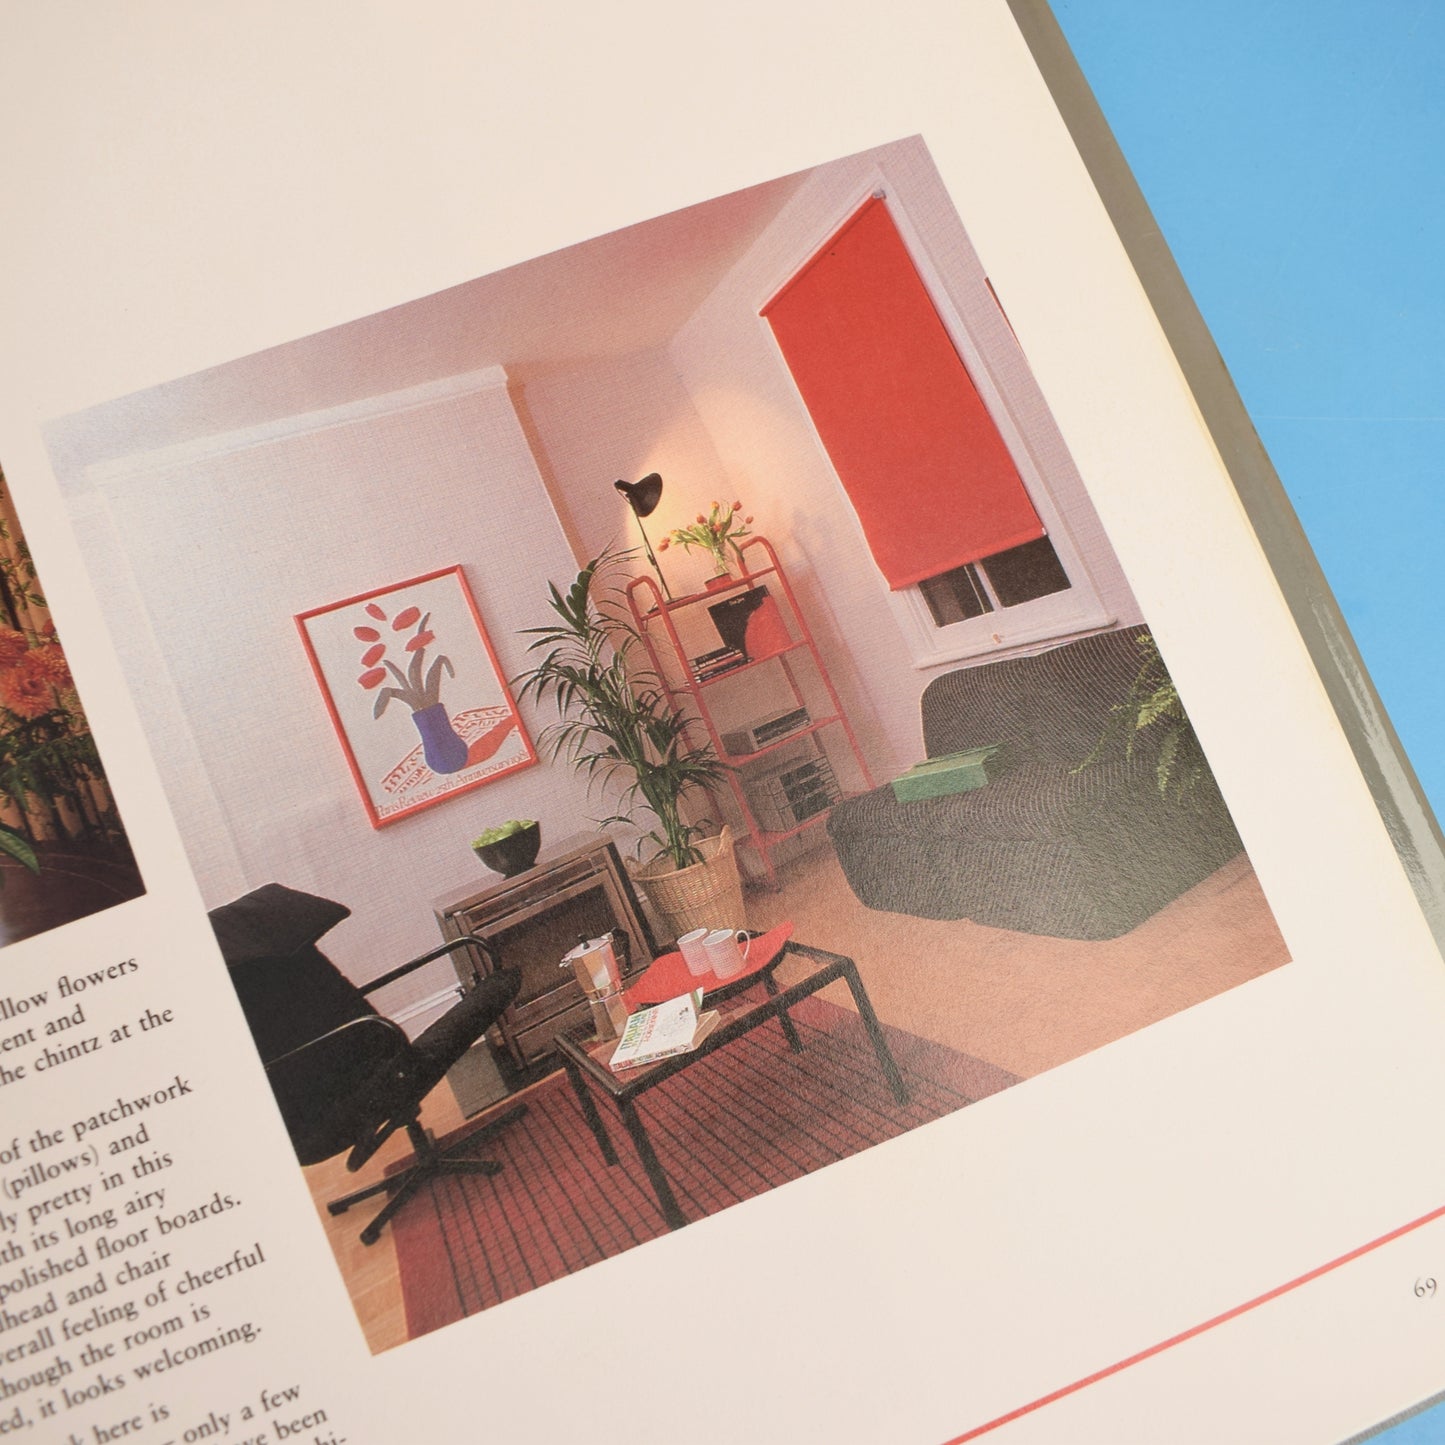 Vintage 1980s Colour In Your Home Book